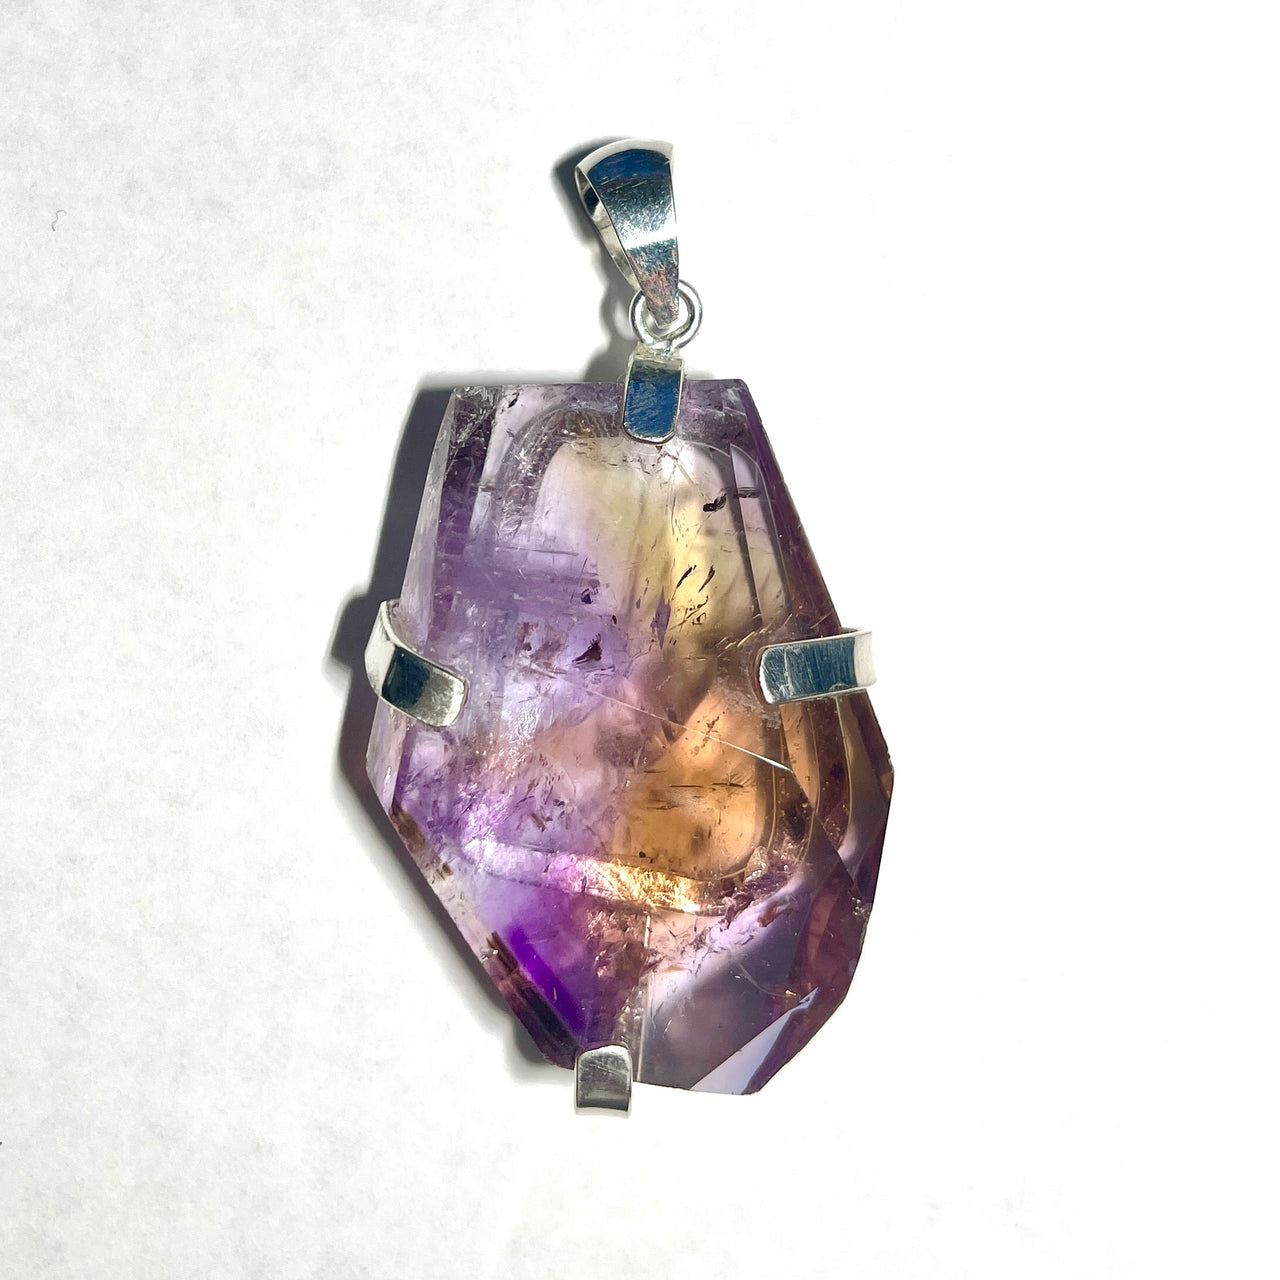 Rare 2" Faceted Ametrine Pendant .925 Sterling Silver Fittings by Balaam